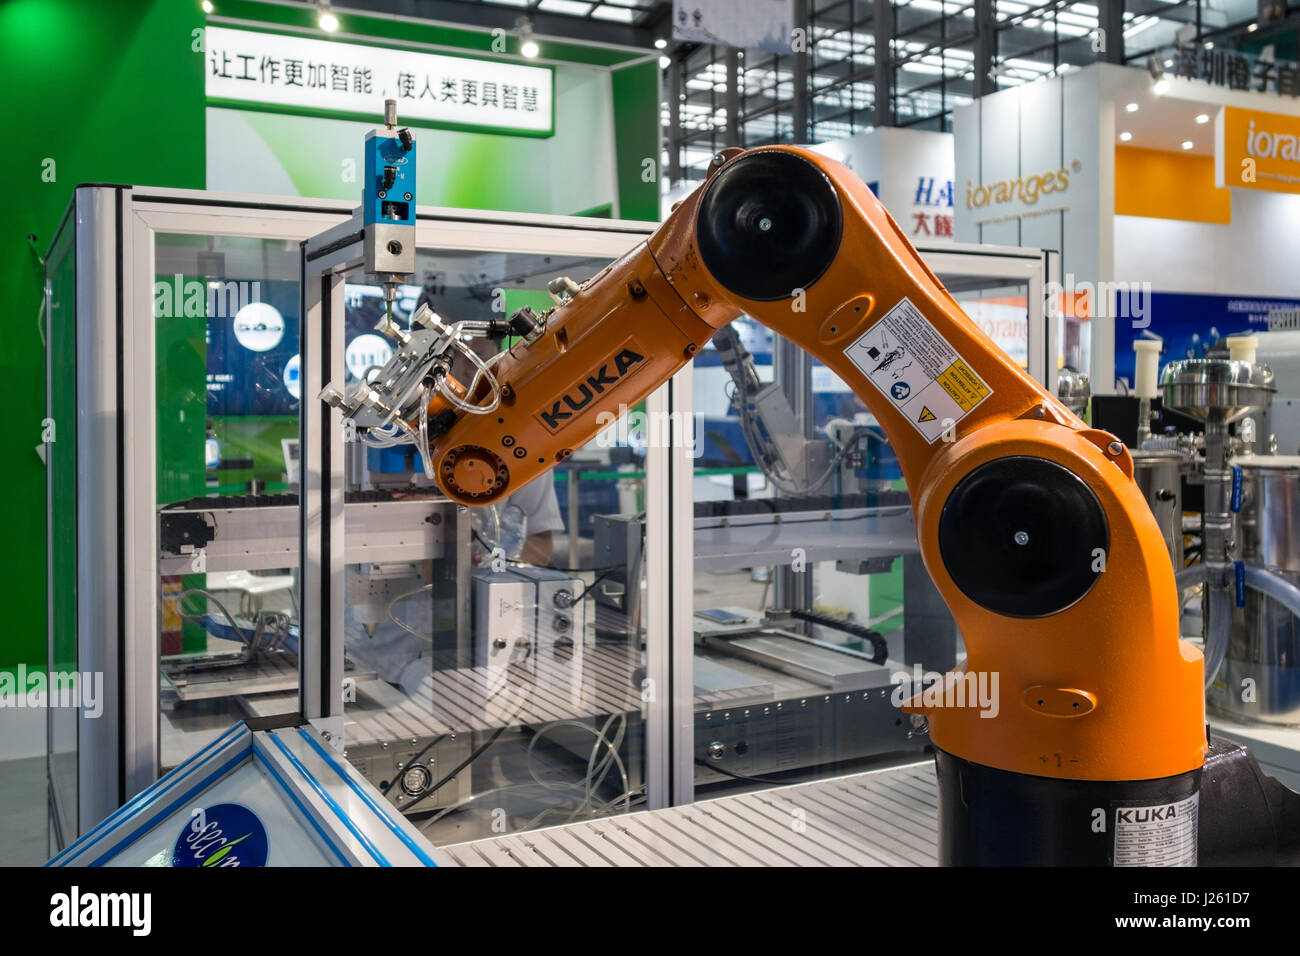 Industrial robot demo at a tech expo in Shenzhen, China Stock Photo